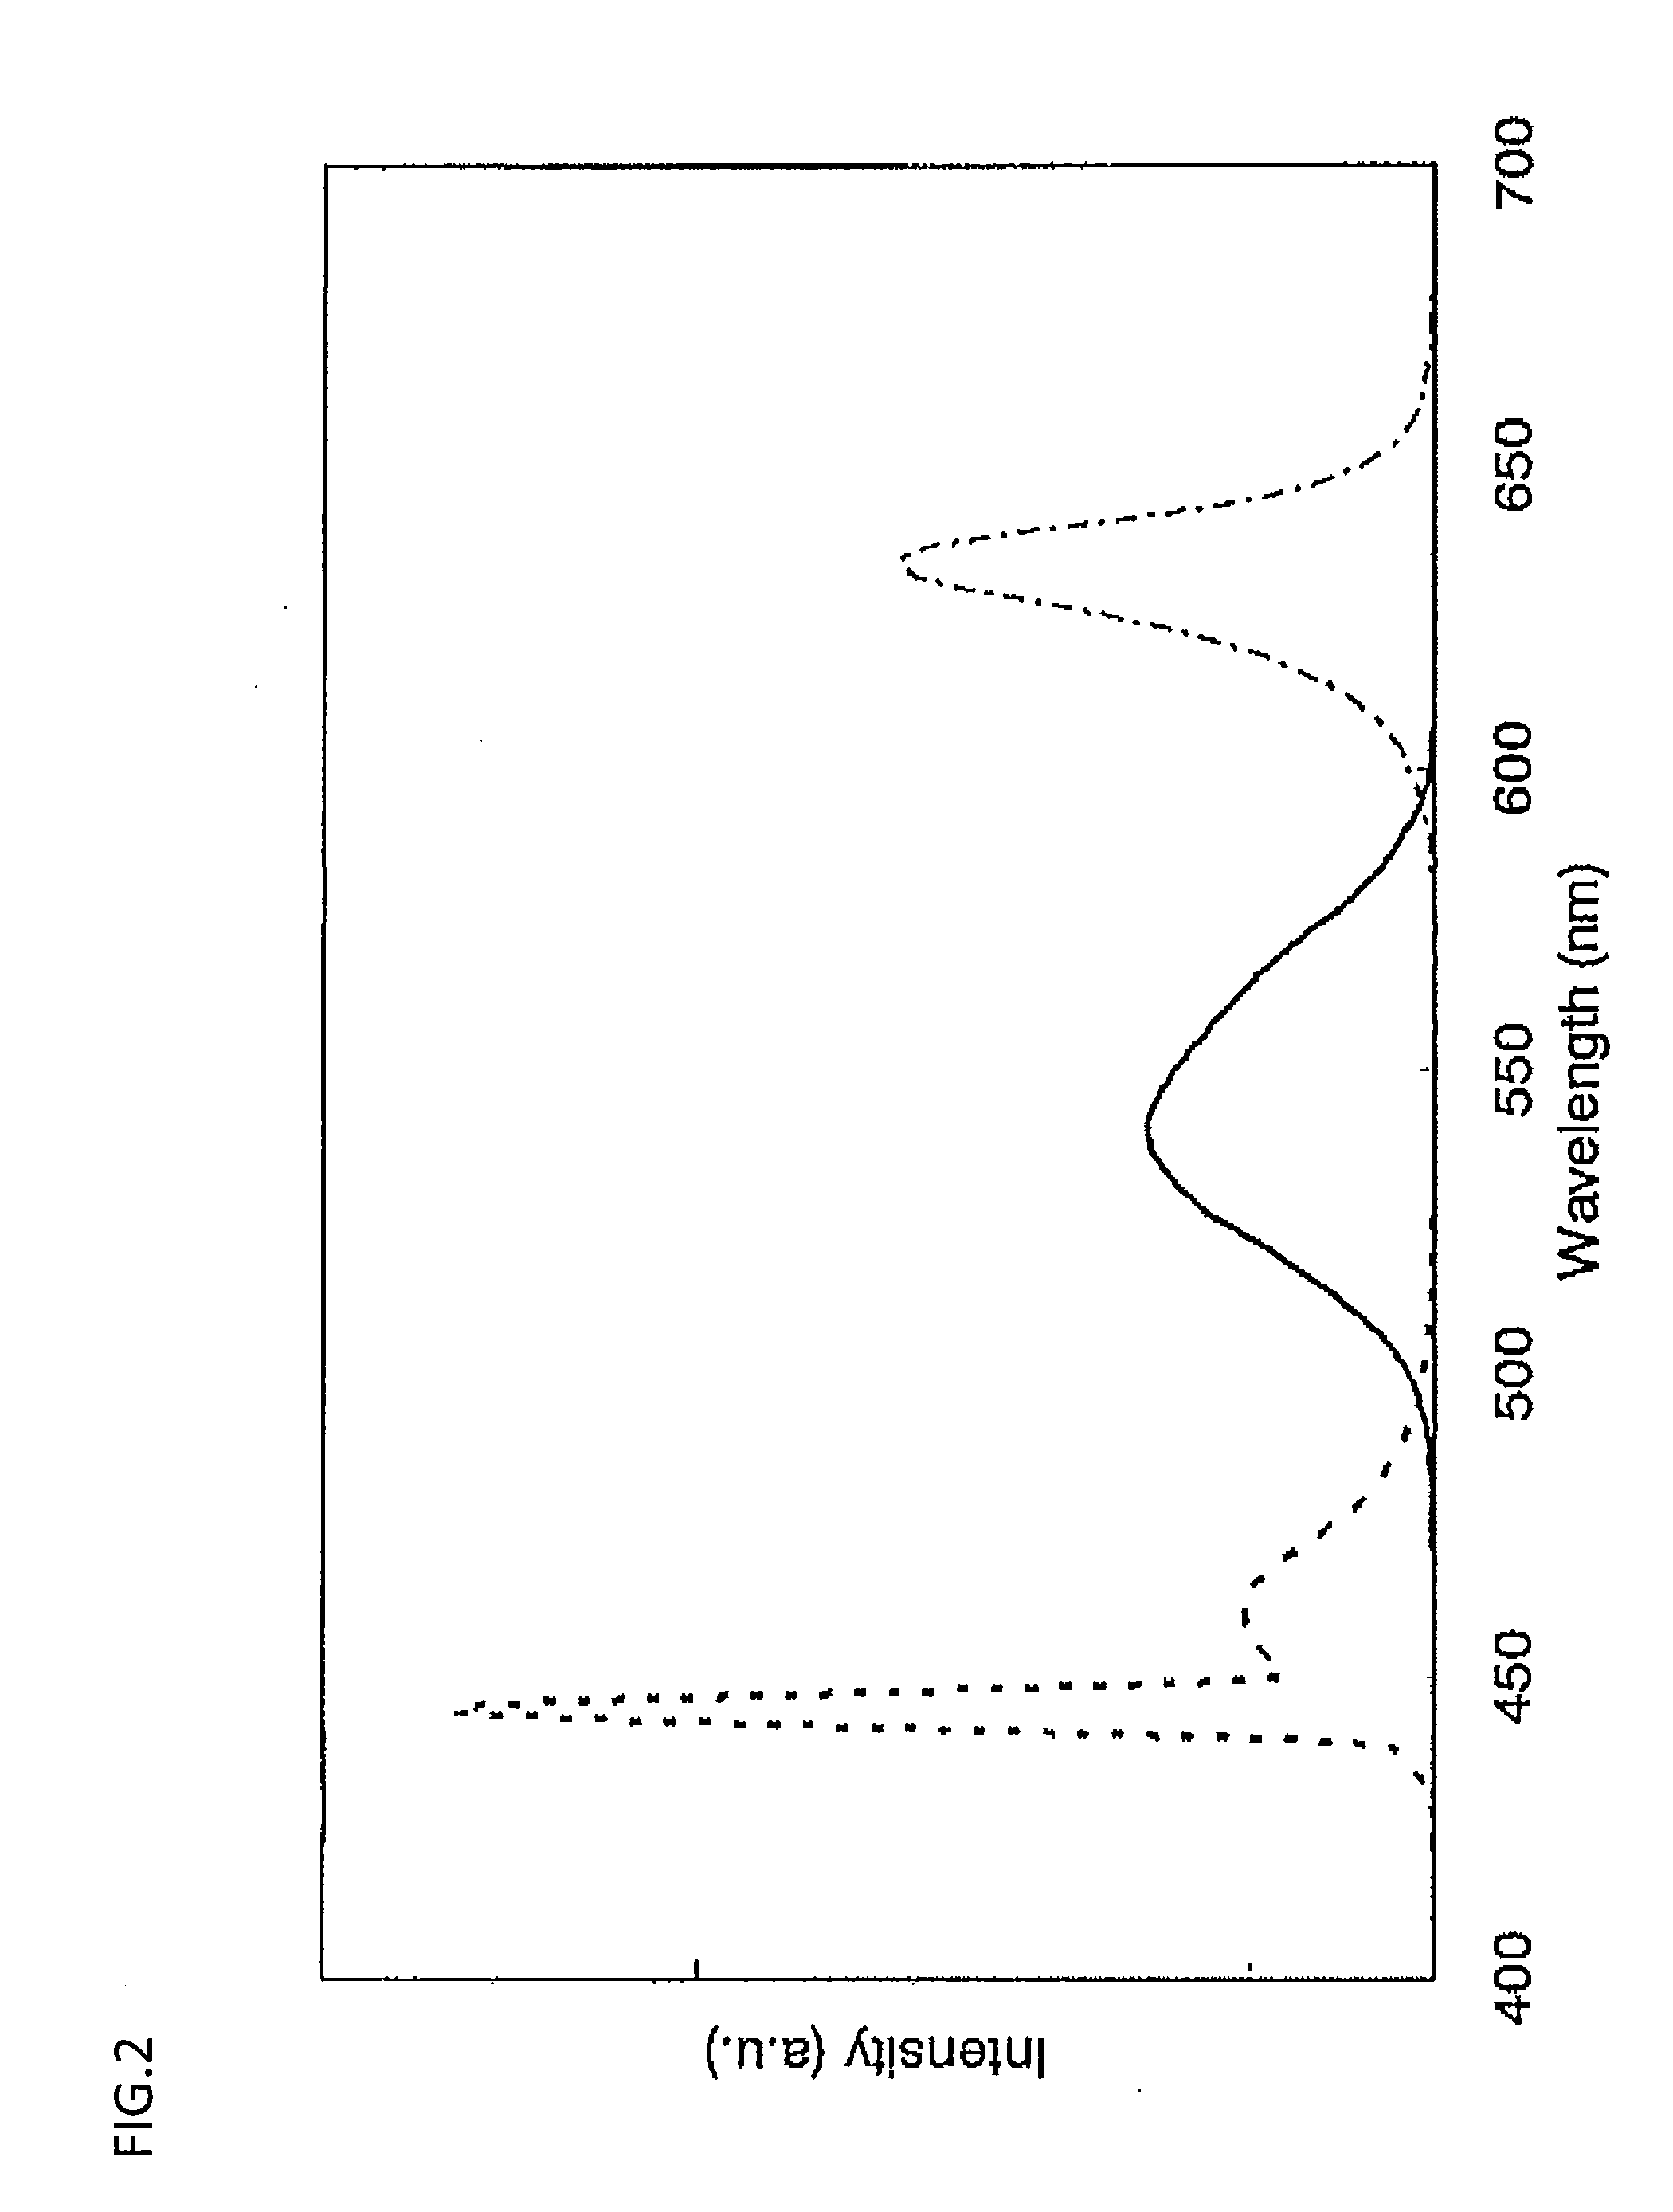 Light source device, lighting device and image display device using such light device